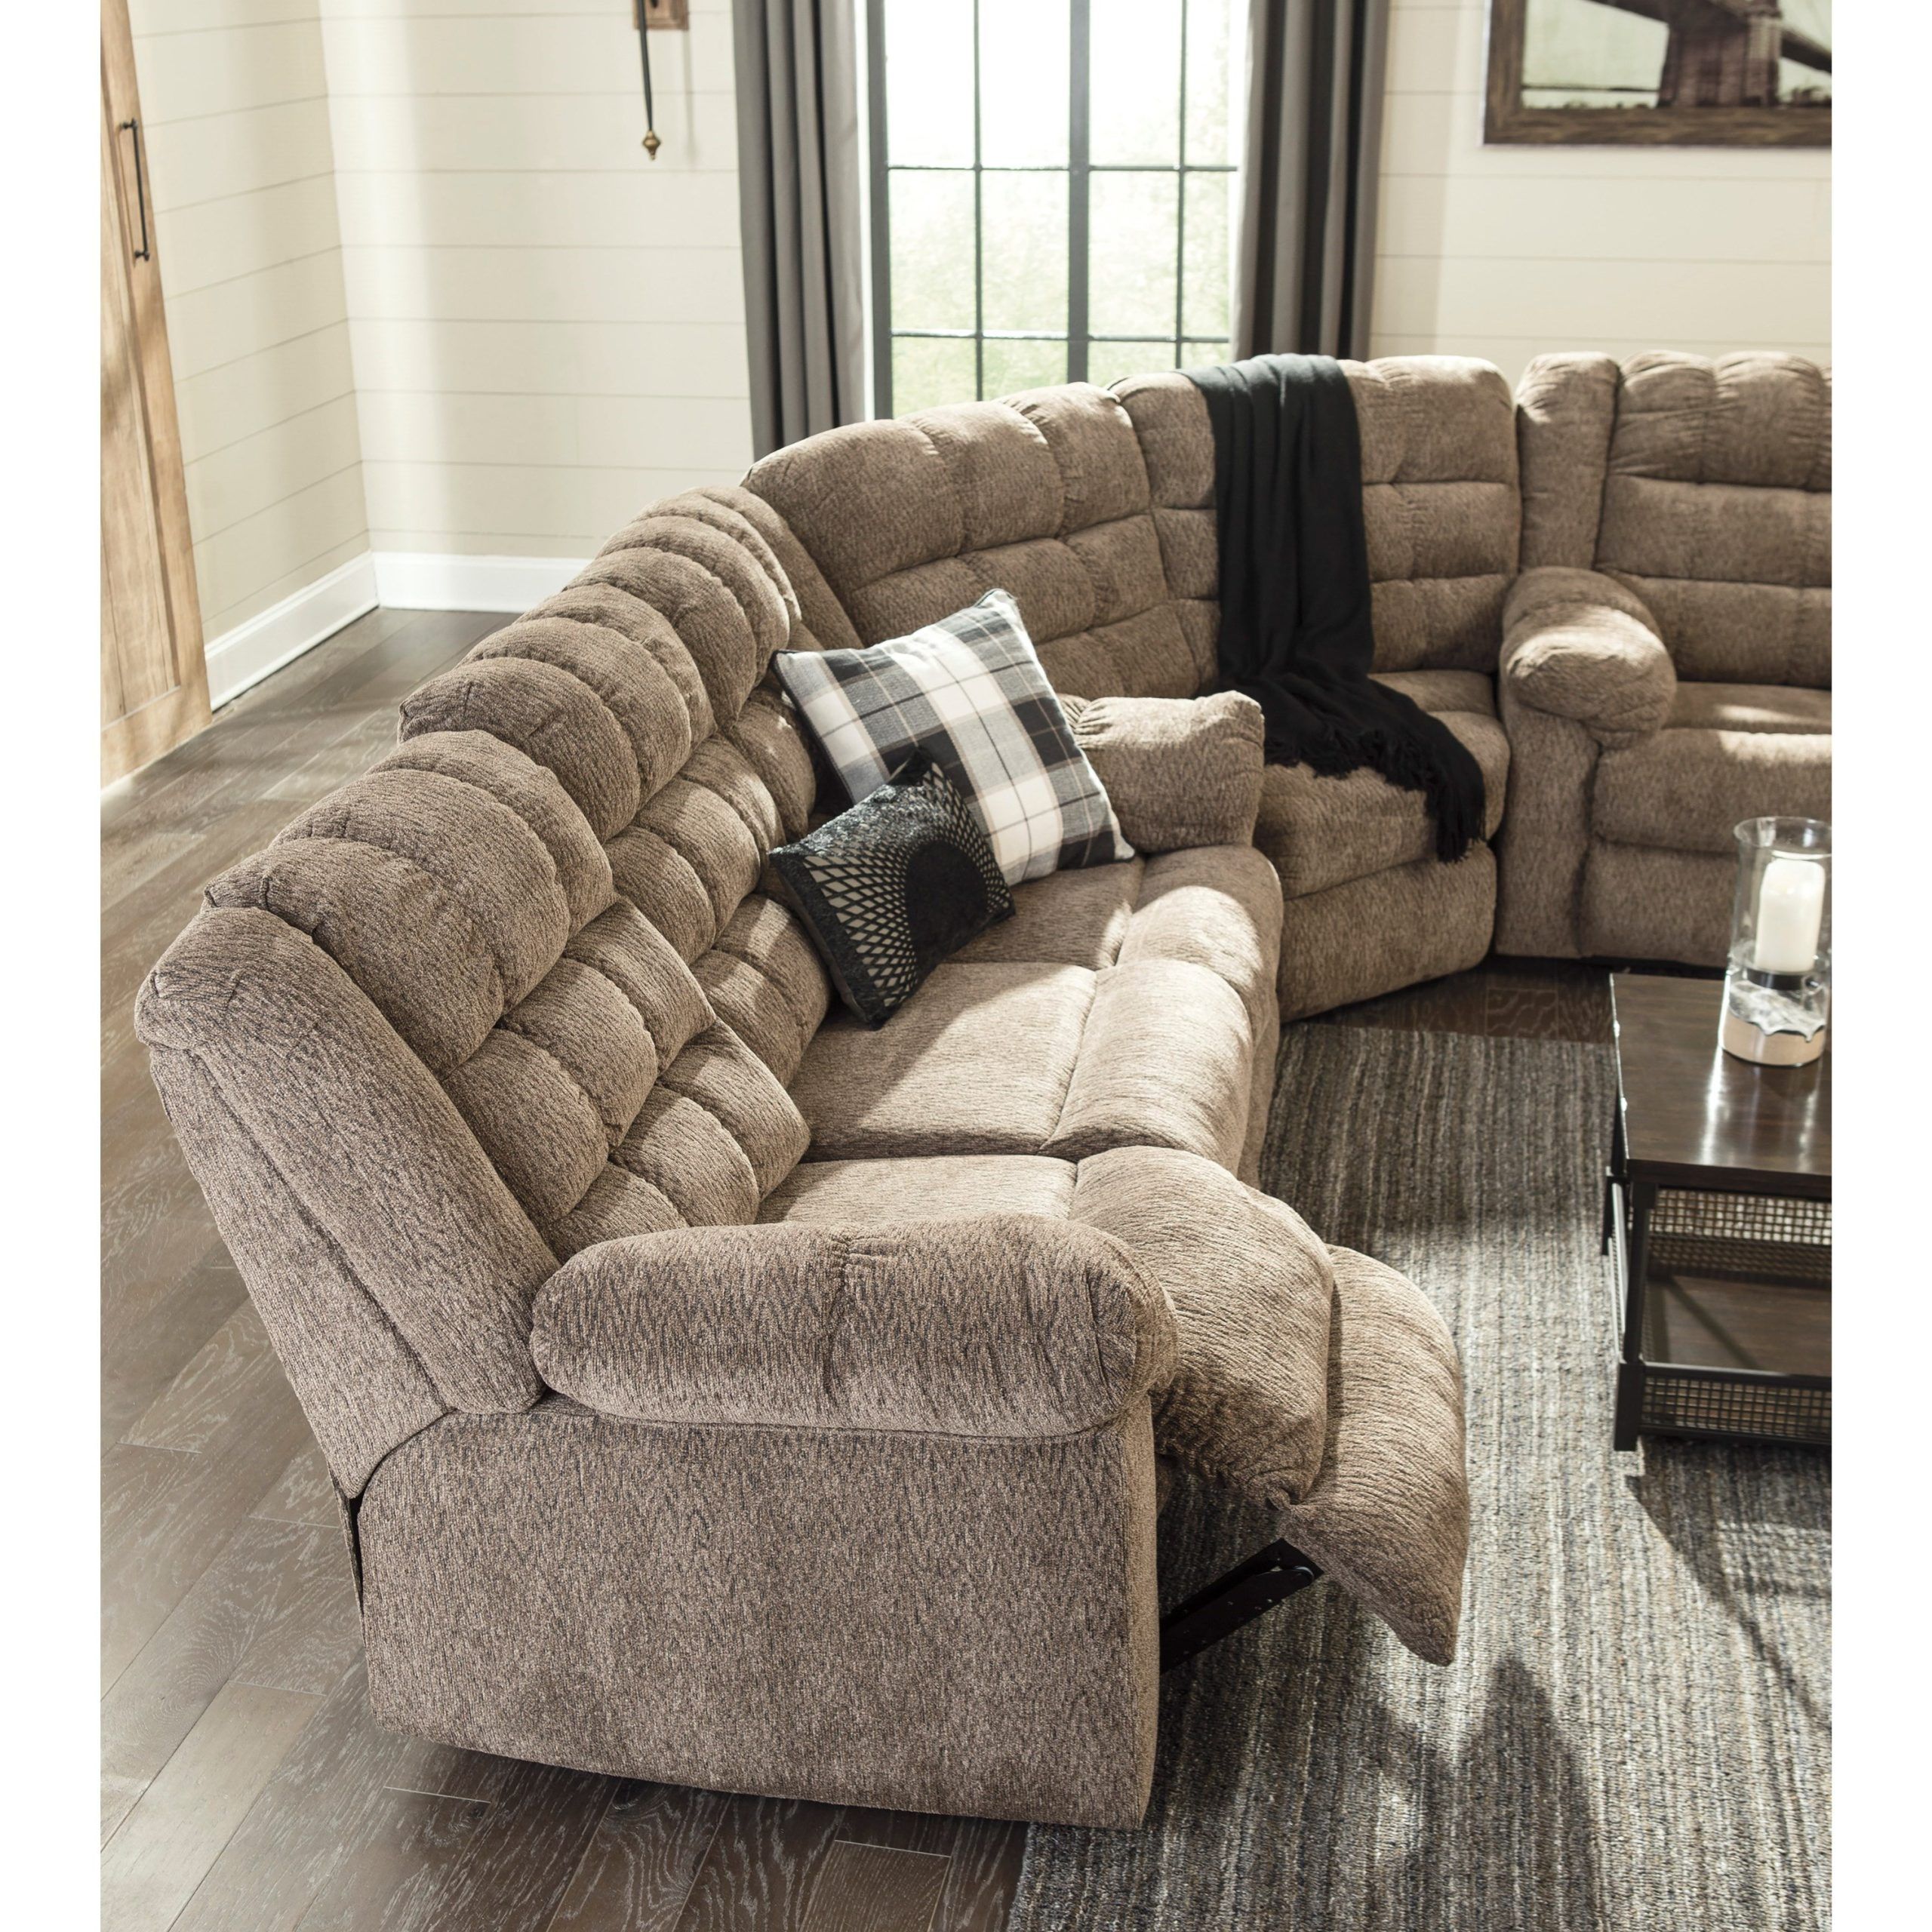 Signature Designashley Workhorse 3 Piece Sectional With Wedge In 3 Piece Leather Sectional Sofa Sets (Gallery 20 of 20)